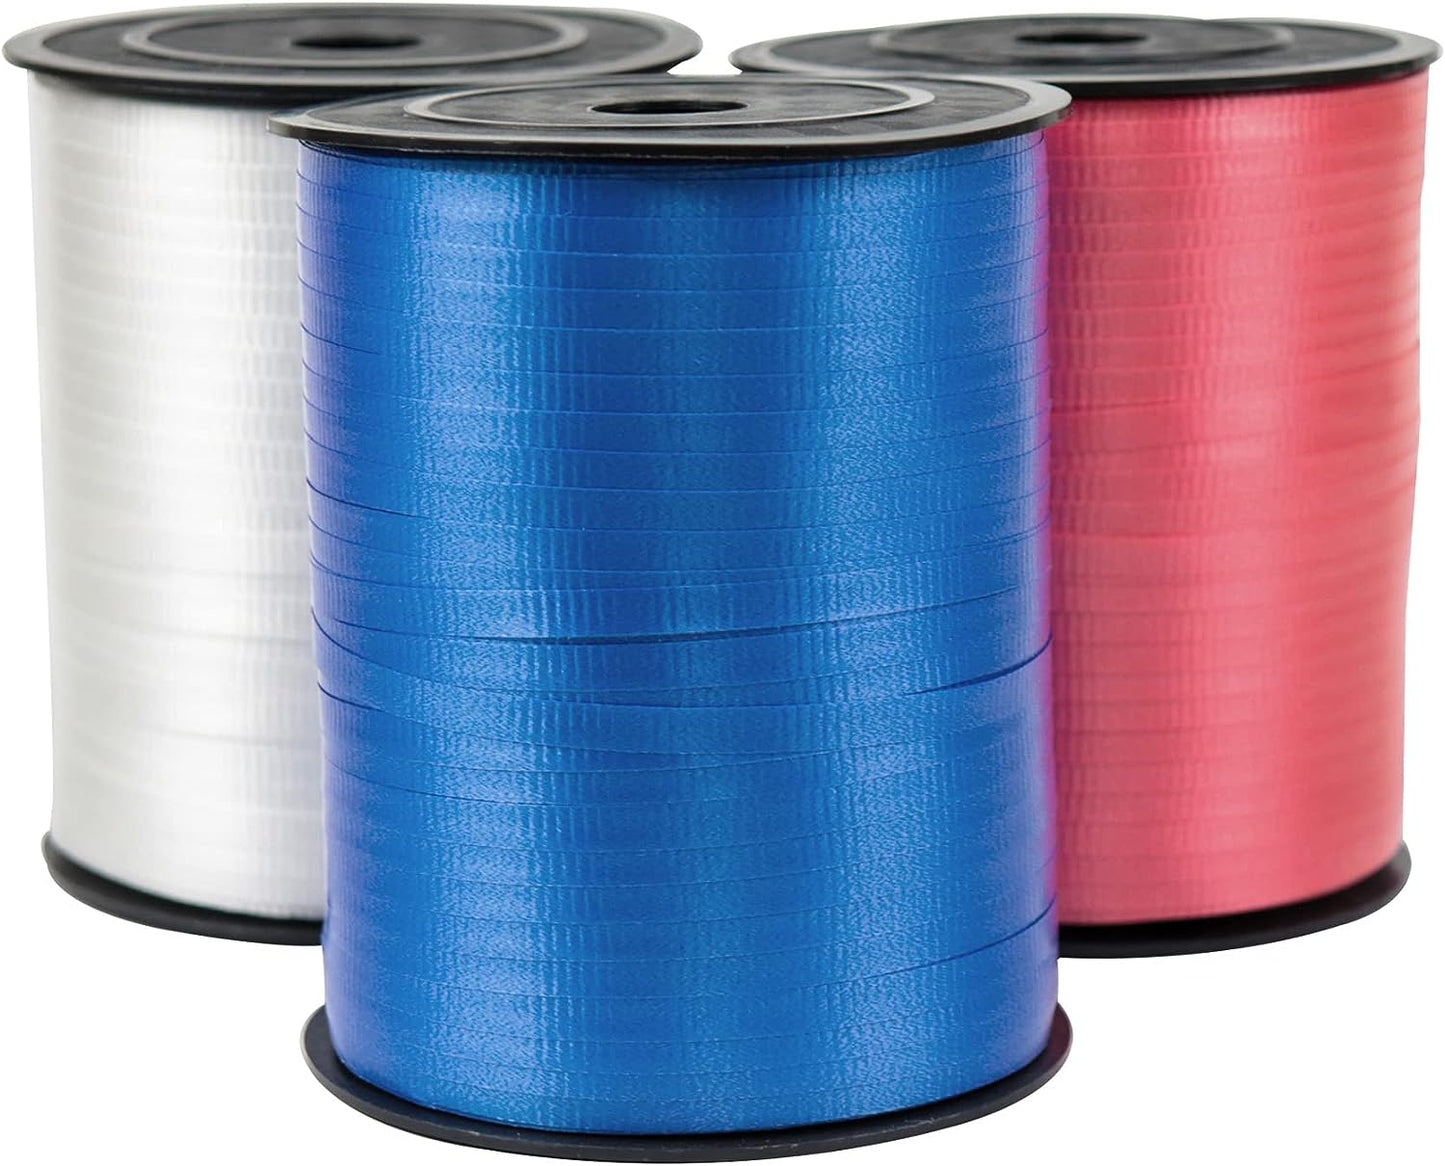 GIFTEXPRESS 1500-Yard Red White Blue Crimped Curling Ribbon